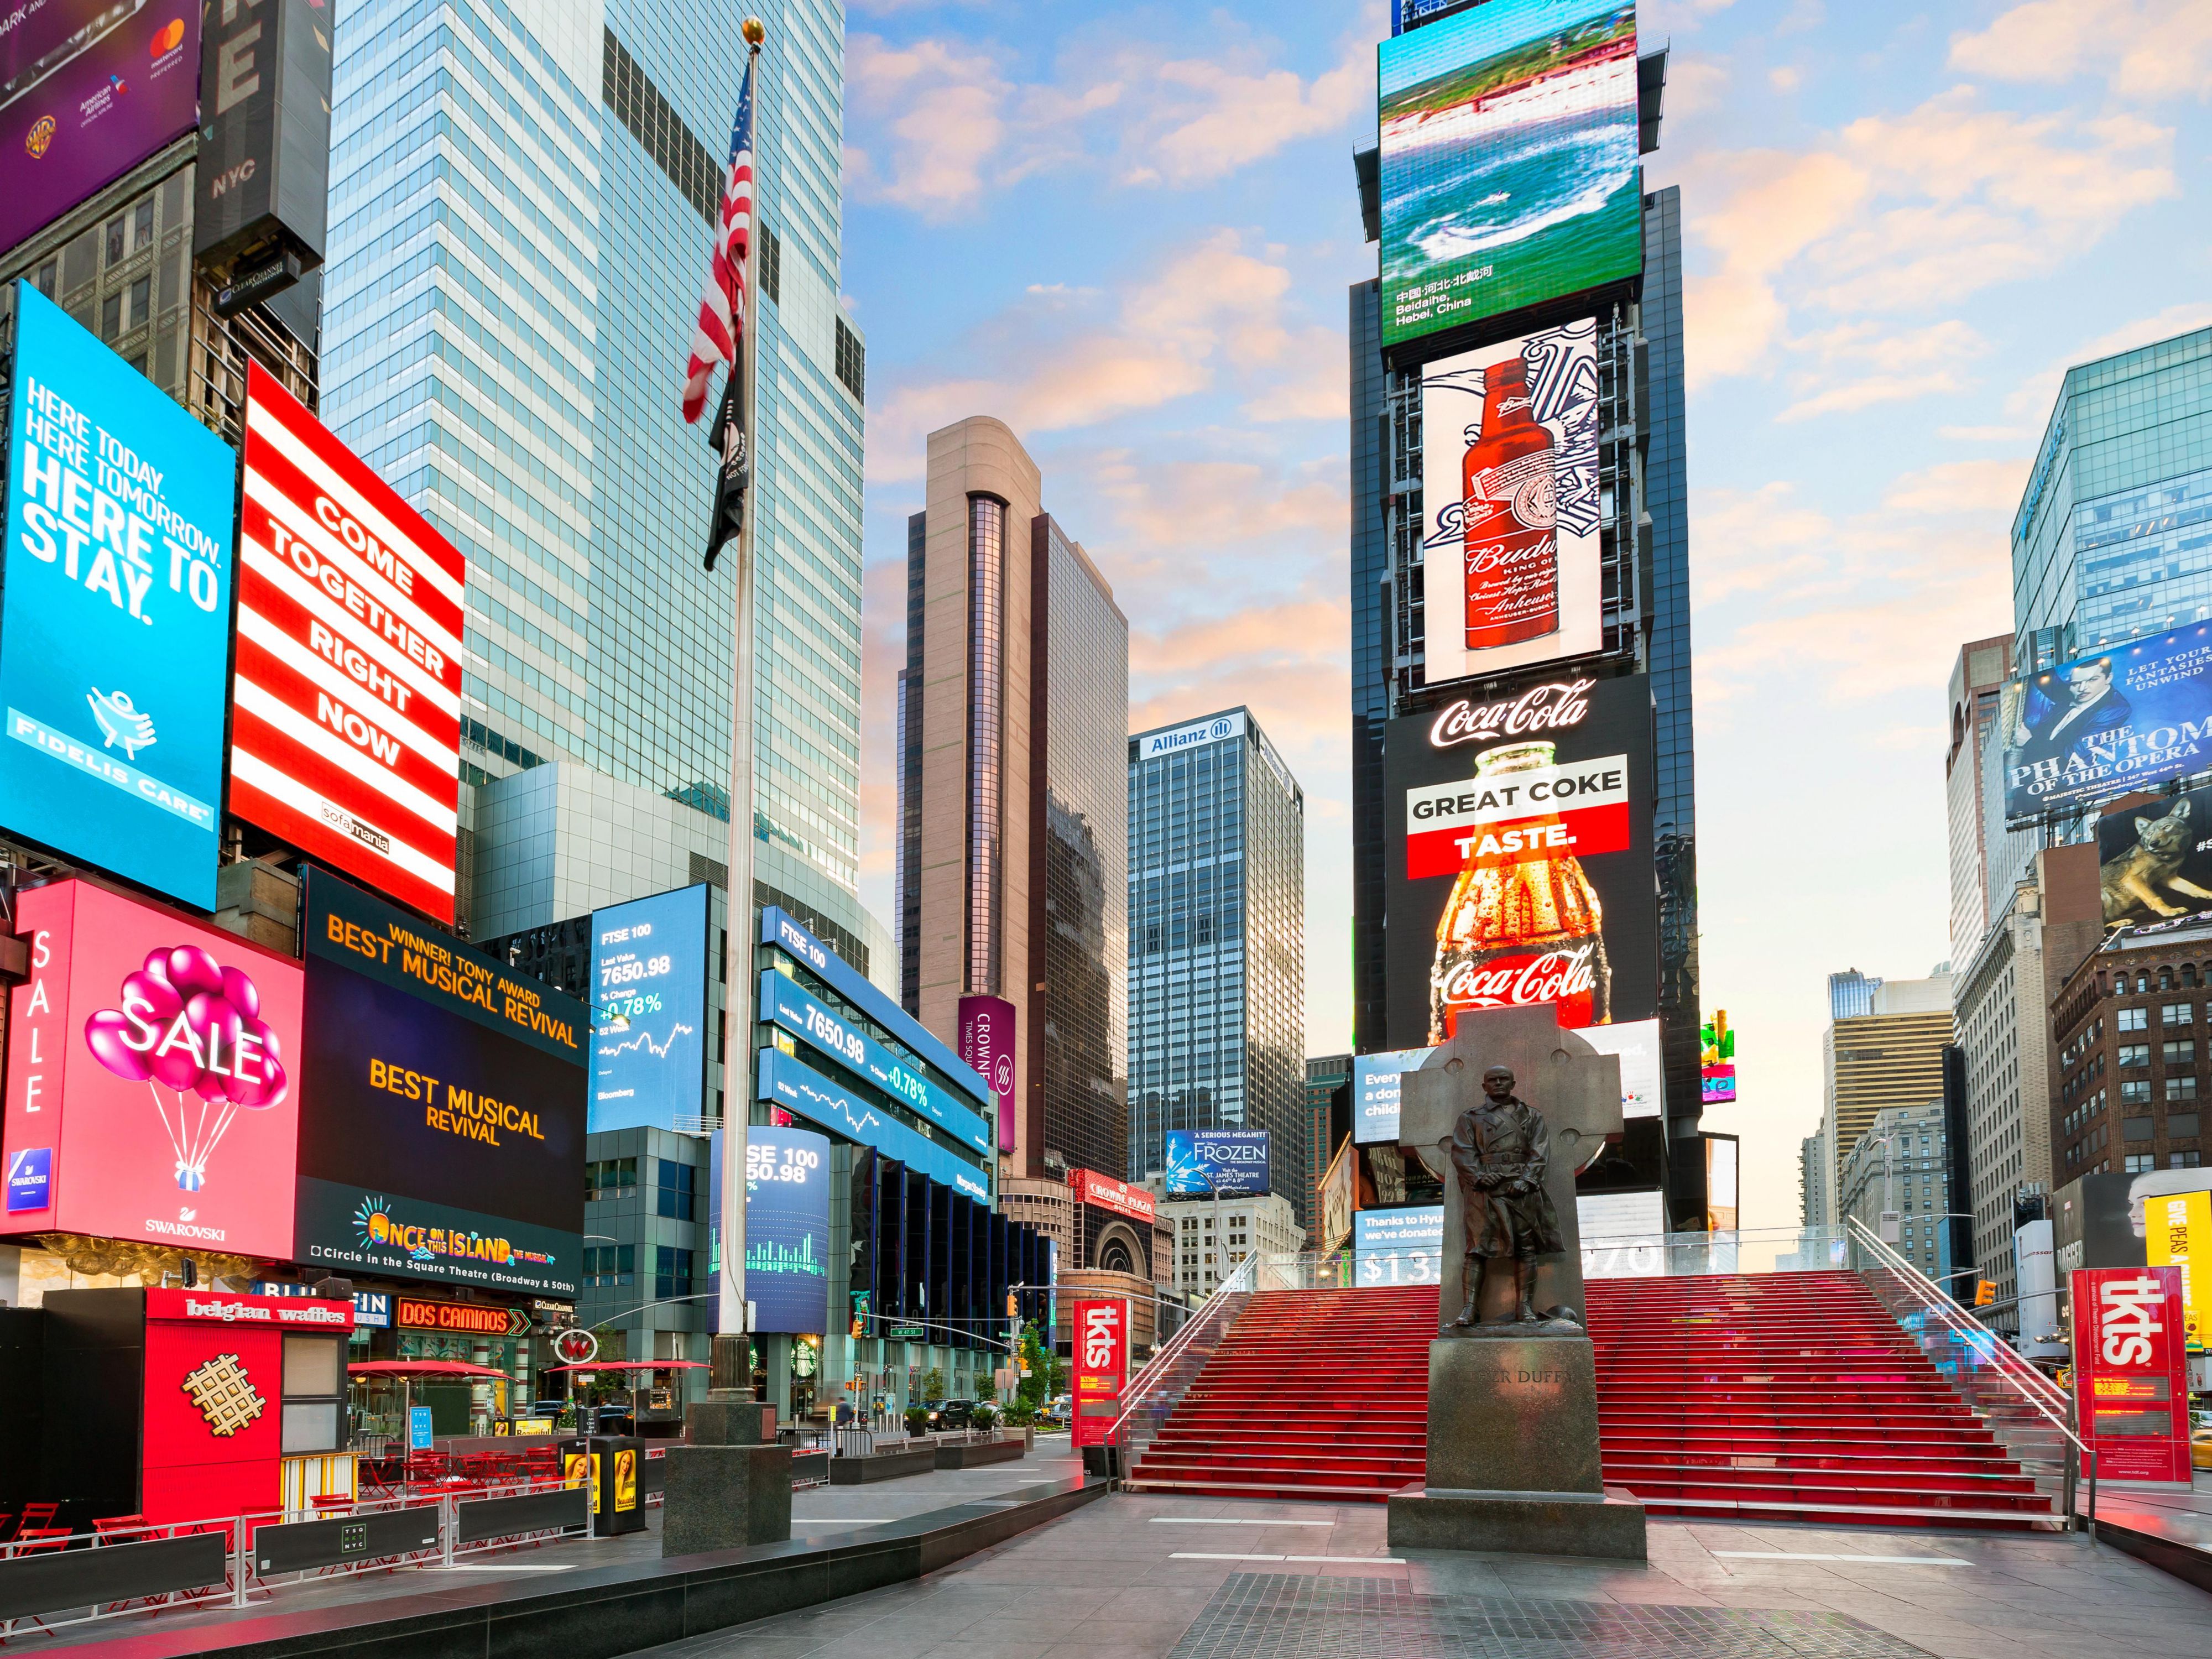 Located in the heart of Manhattan, directly on Broadway between 48th and 49th Streets, we are steps from Fortune 500 companies, the best shopping, dining, and theatre. Discover popular attractions, including Times Square, Central Park, Rockefeller Center, and Radio City Music Hall. 